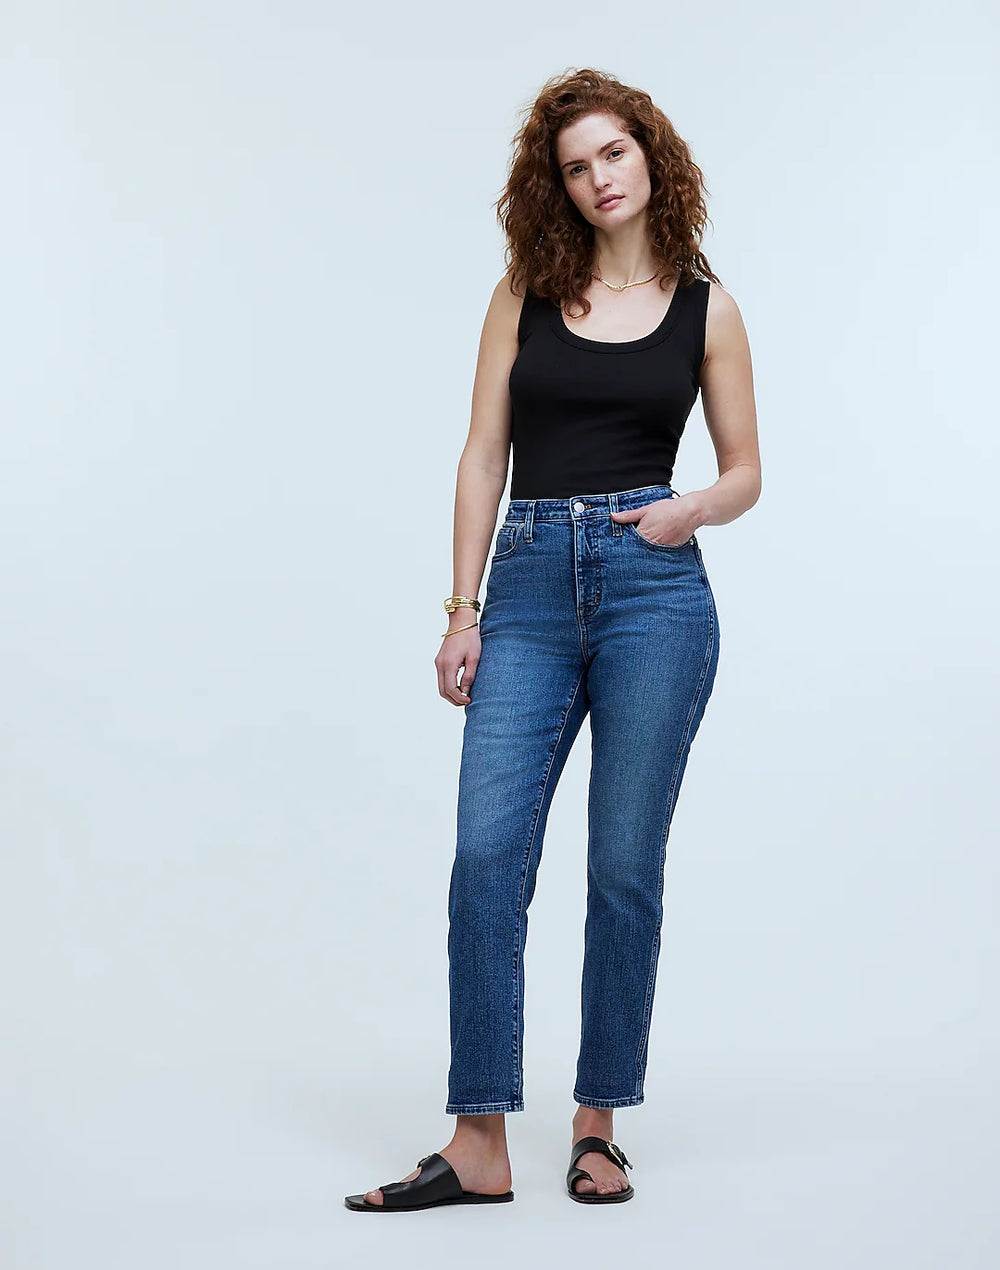 These $40 American Eagle Mom Jeans Are Perfect for Petite Sizes